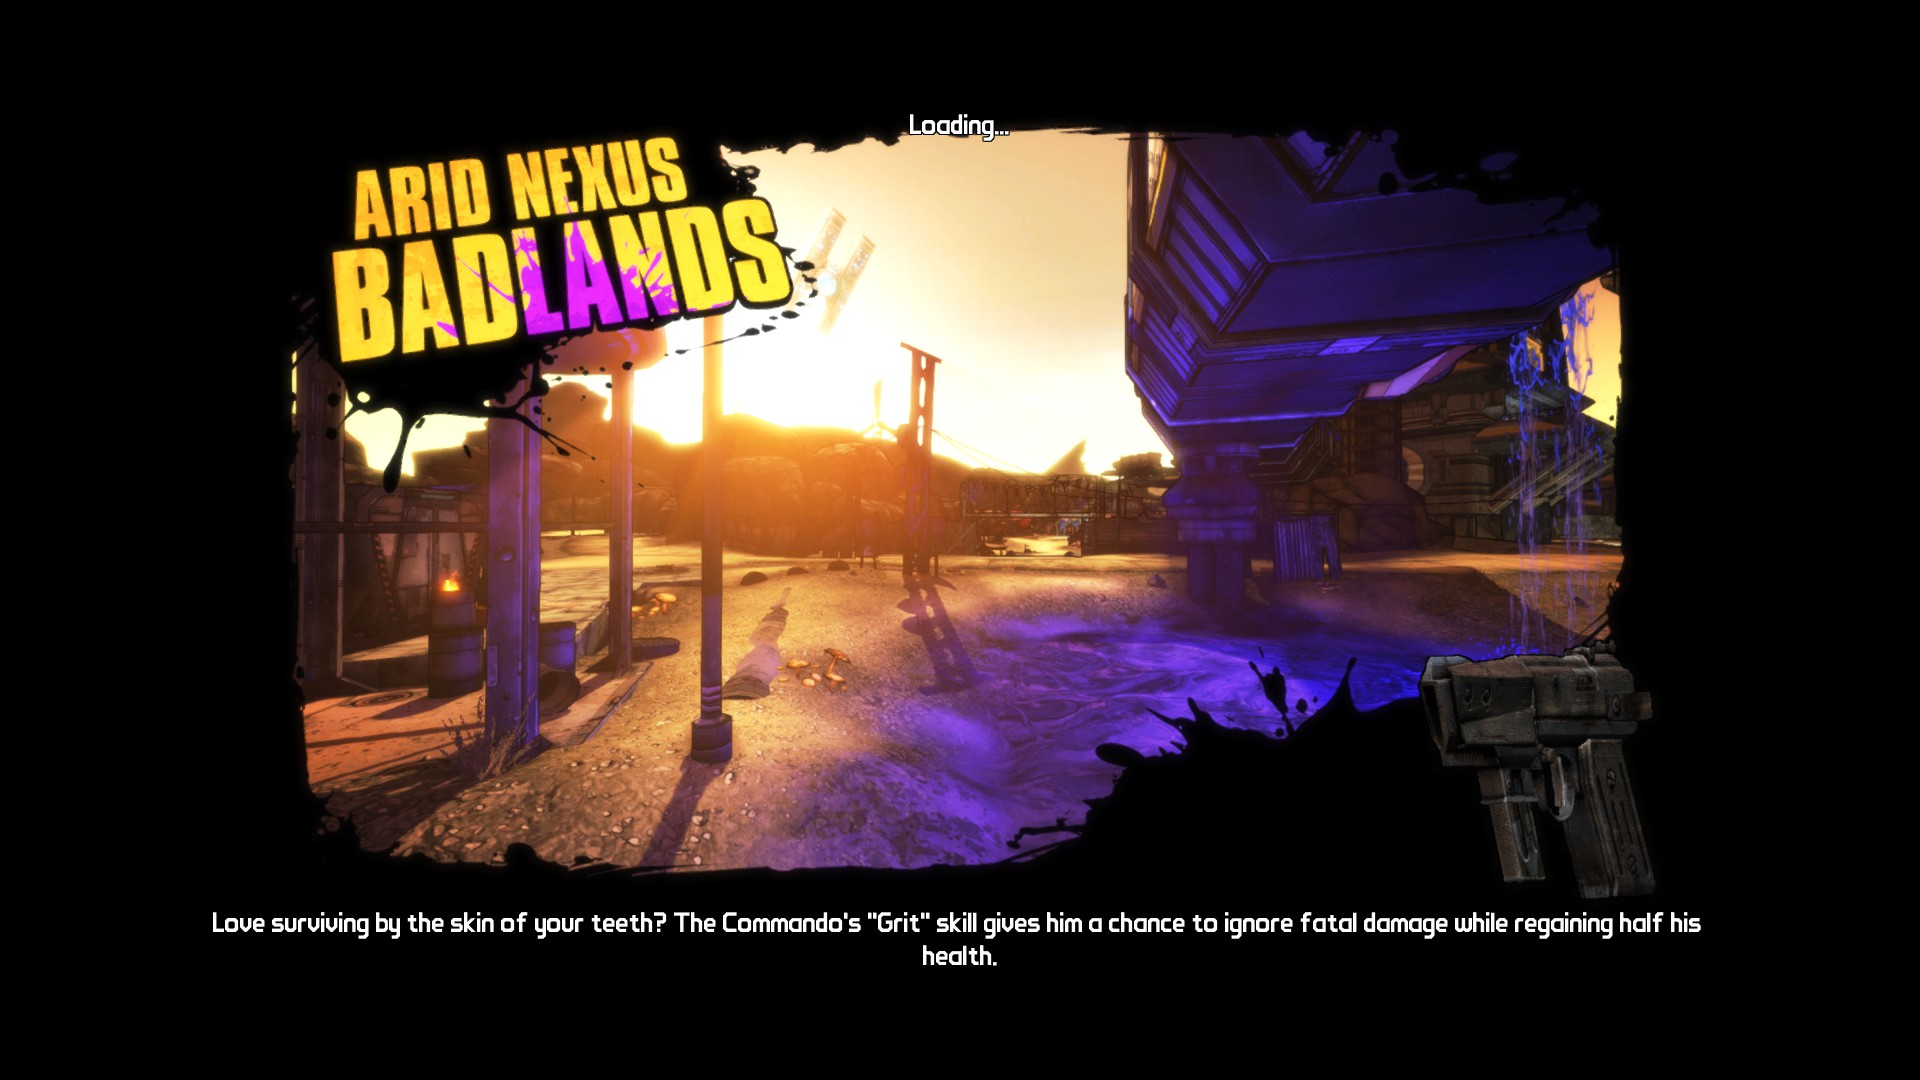 Borderlands 2 How to Set up Read-only farming Guide